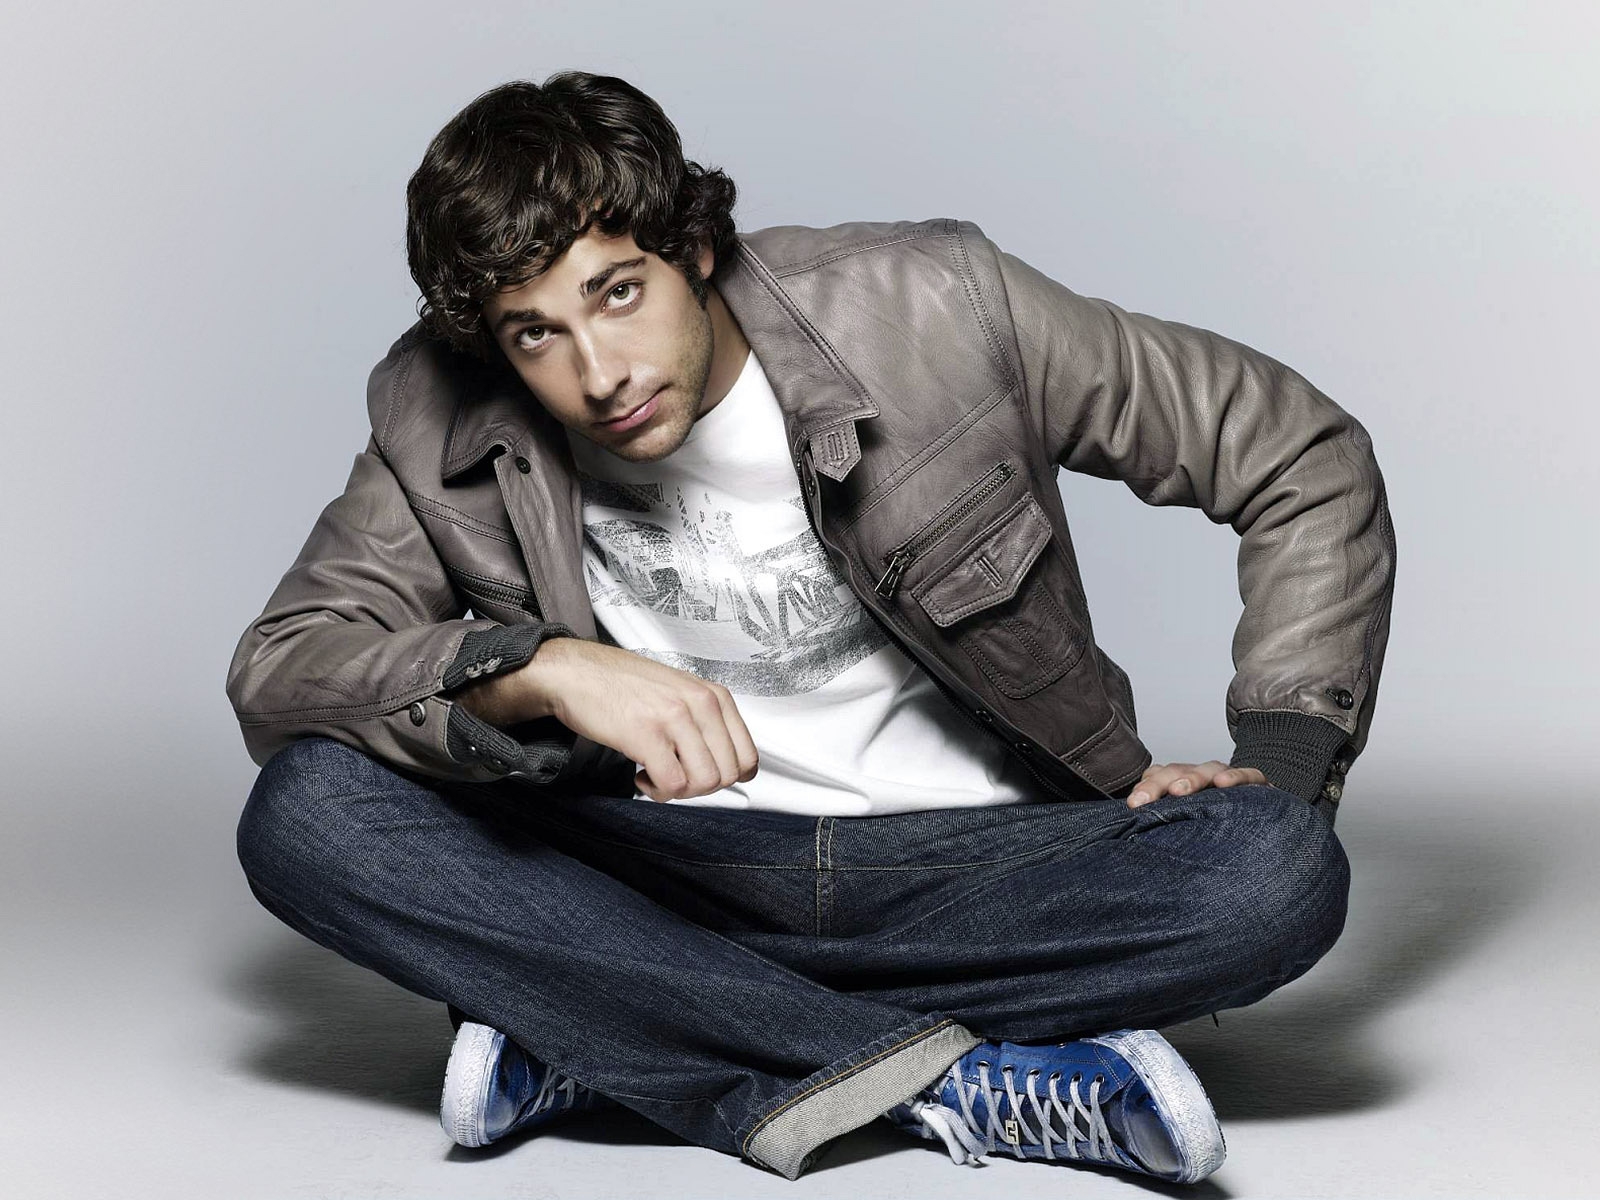 Zachary Levi Looking up for 1600 x 1200 resolution